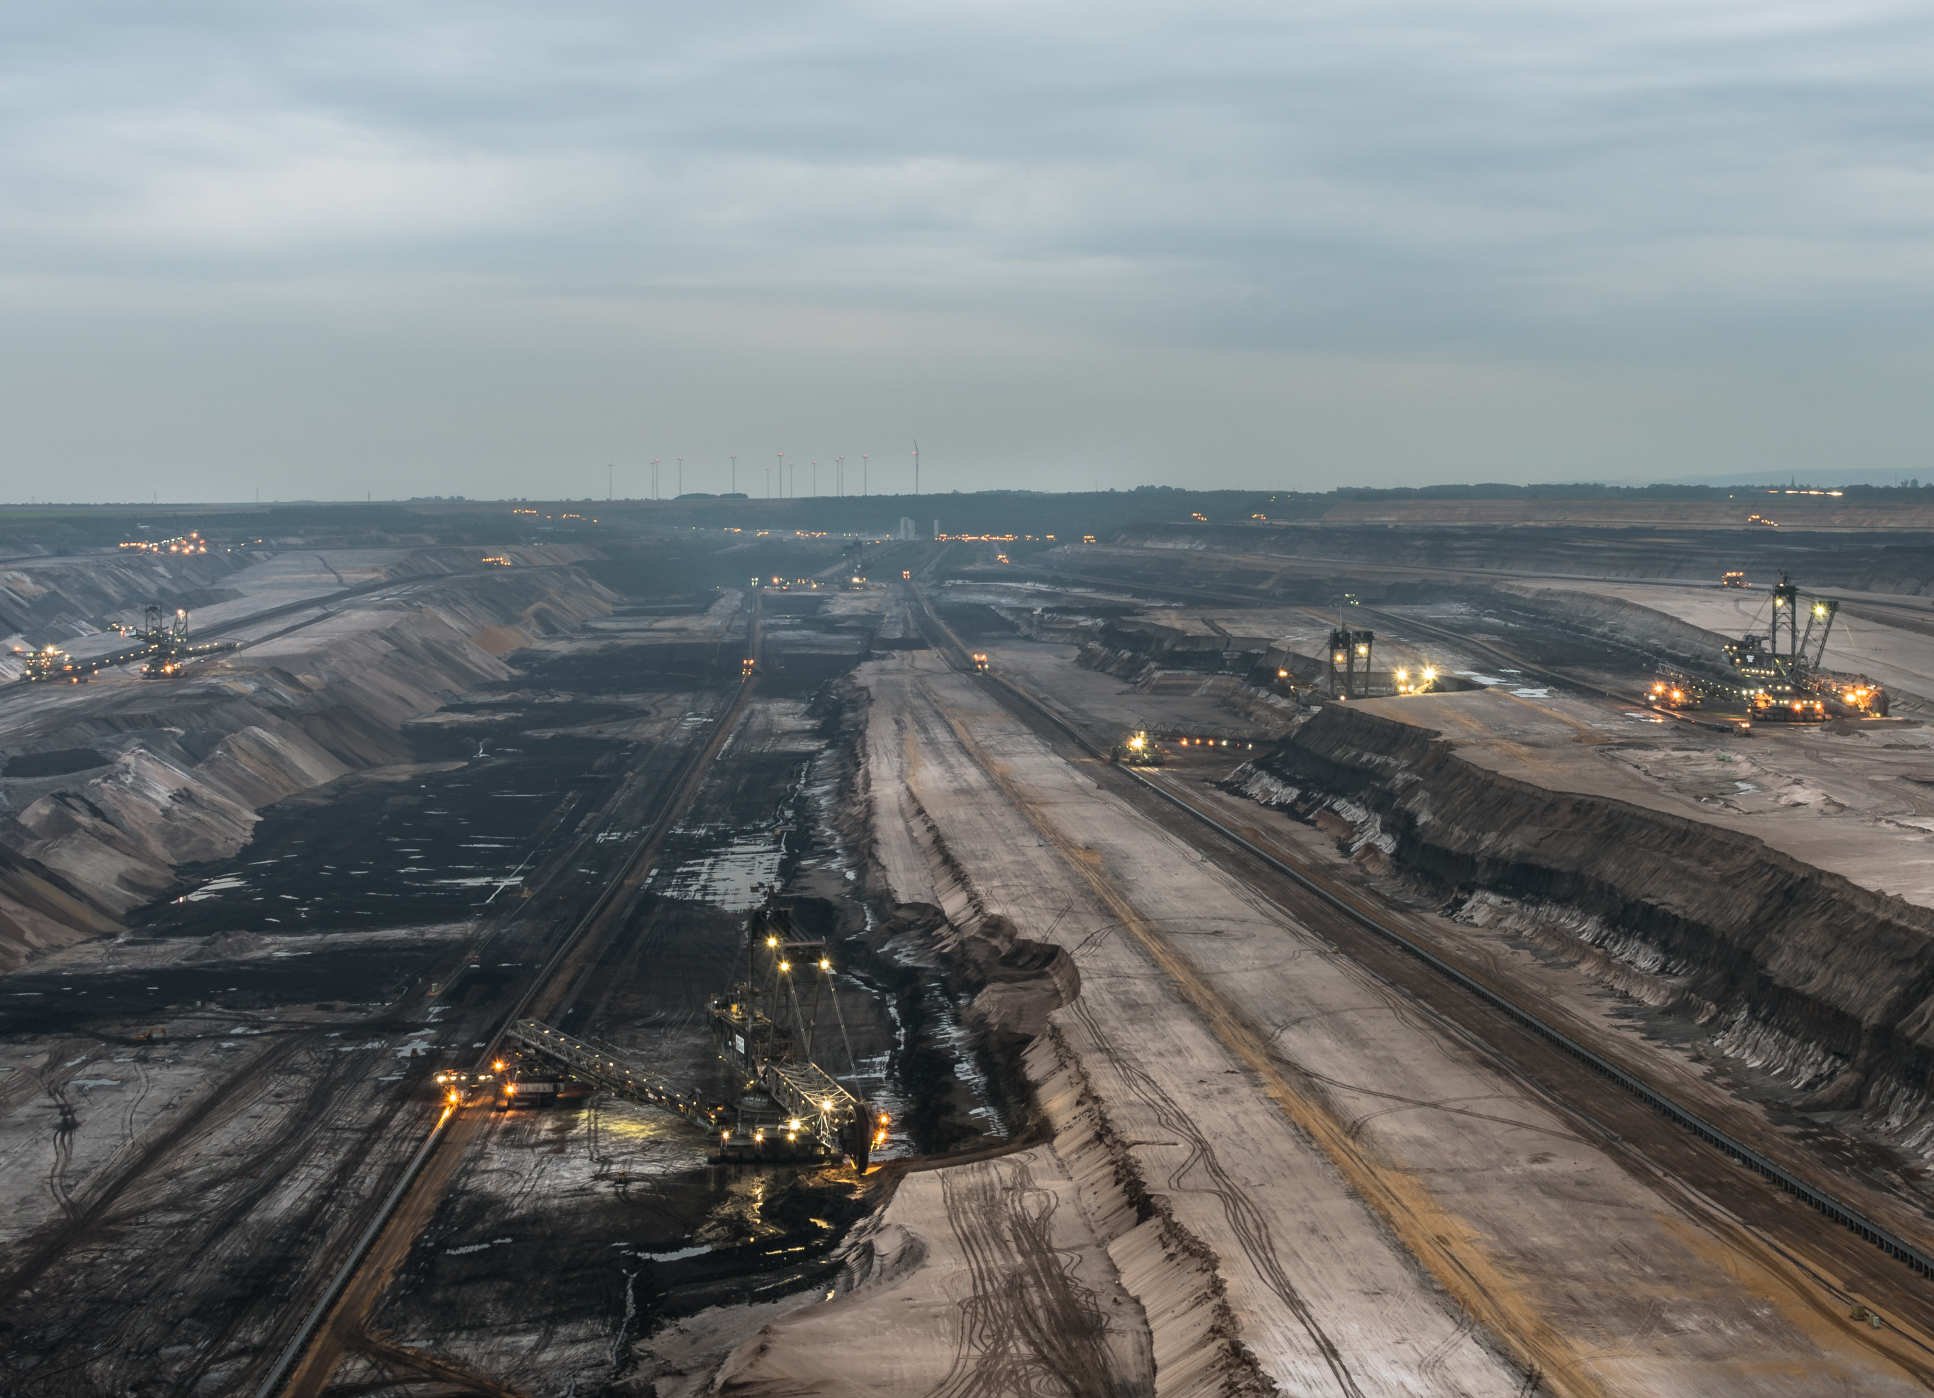 Open-pit coal mine covering a large surface area with heavy machinery